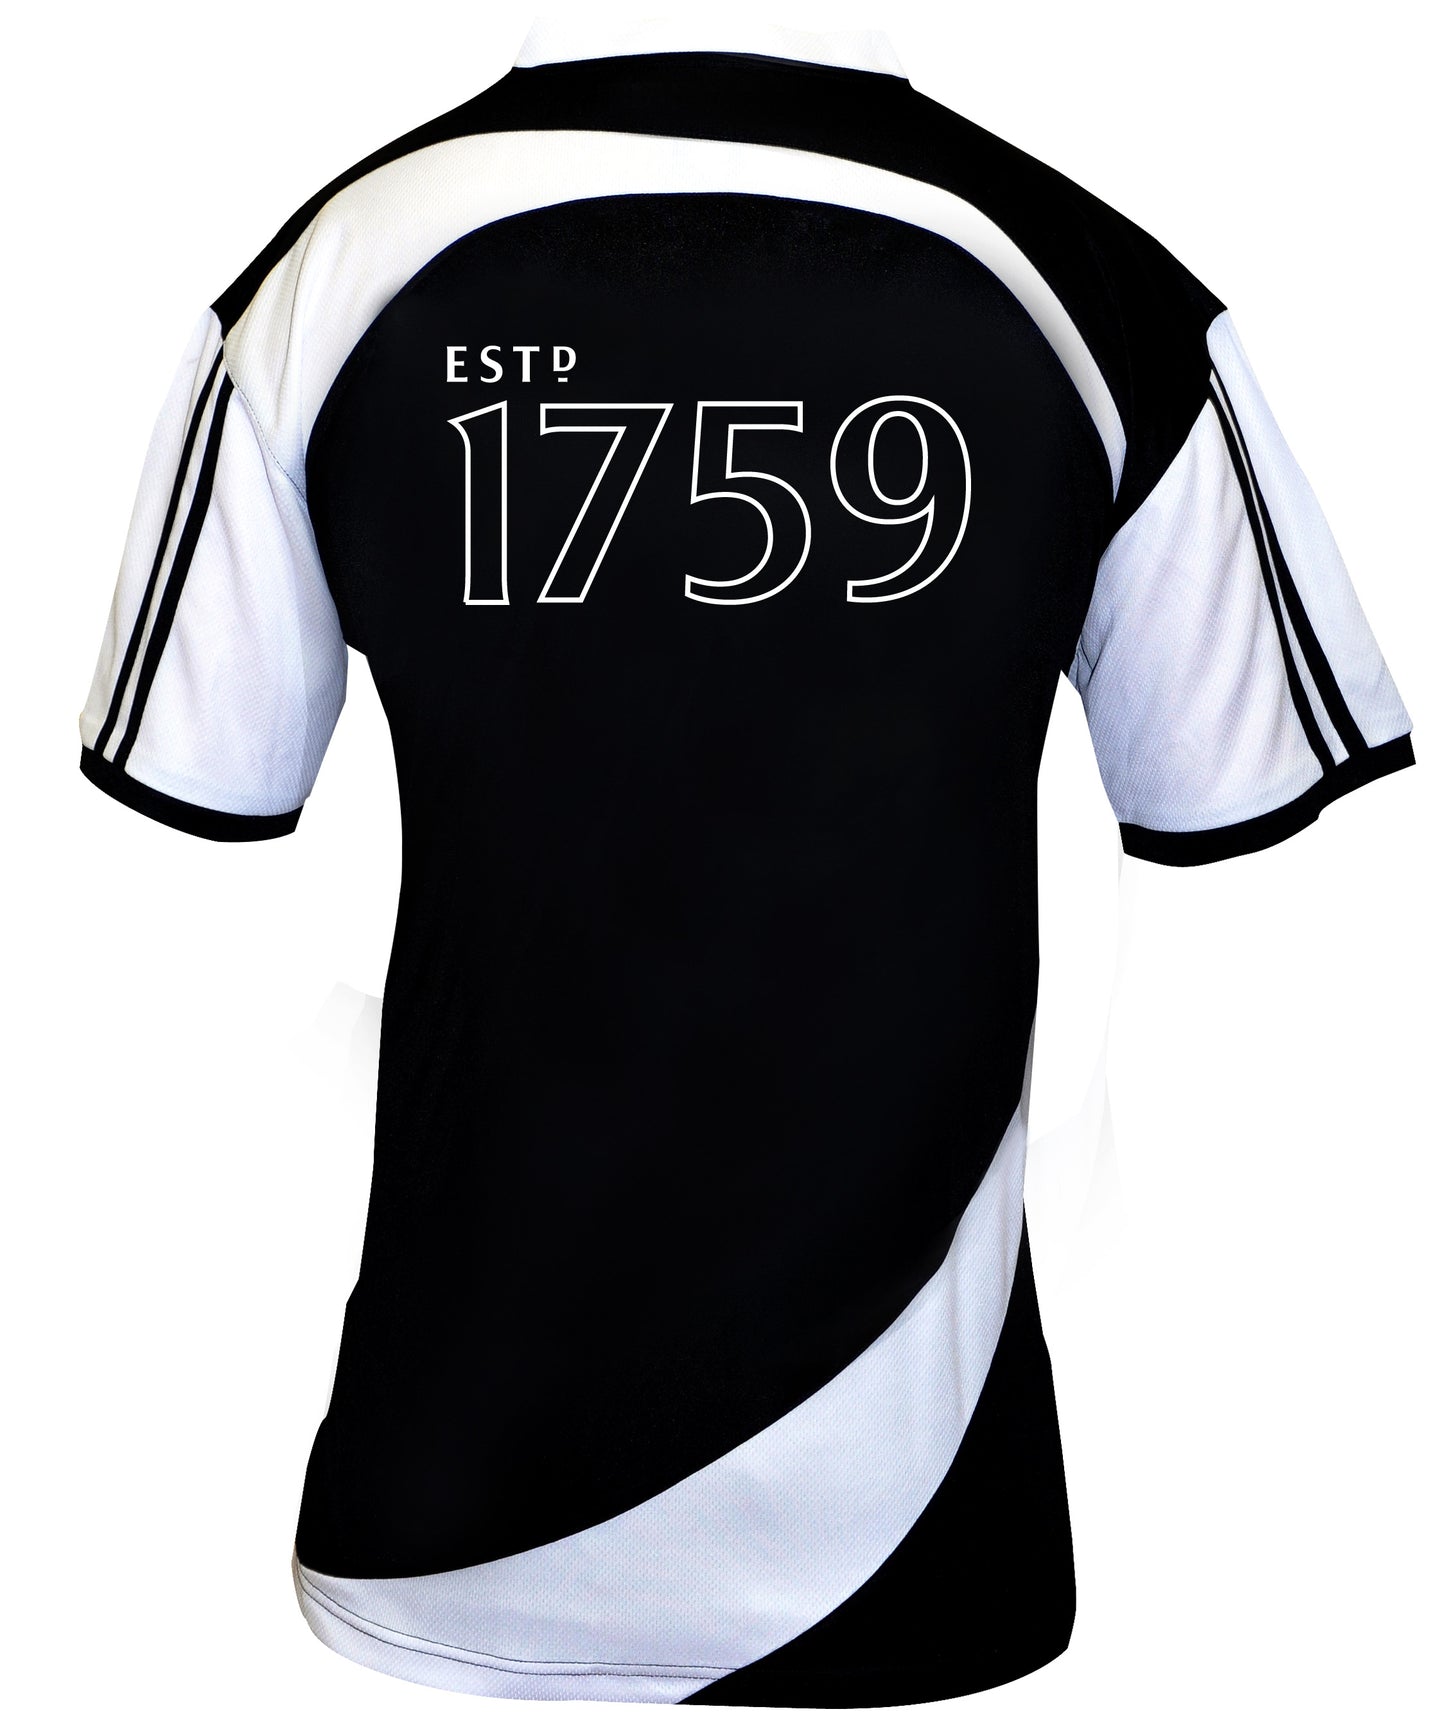 A Guinness® Soccer Jersey with the number 1759 on it.